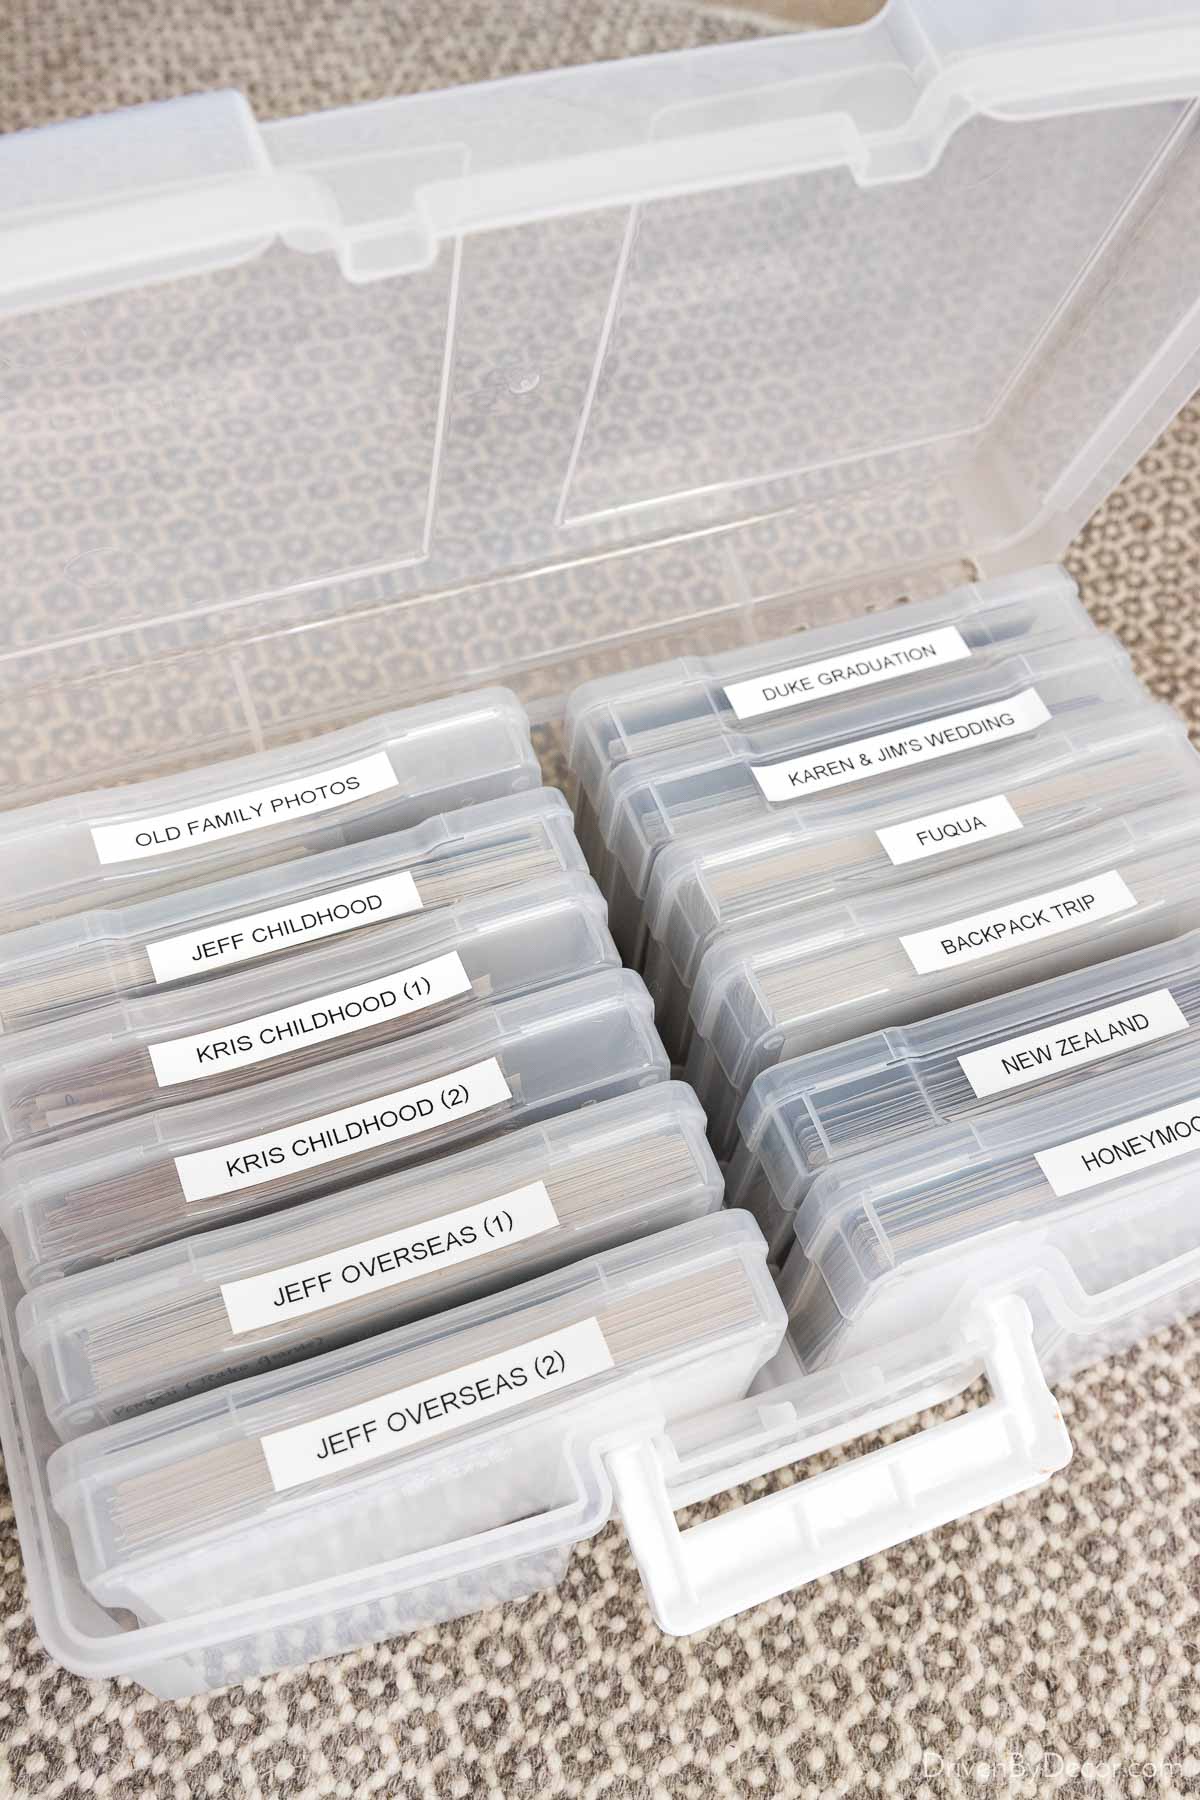 Labeled photo storage cases